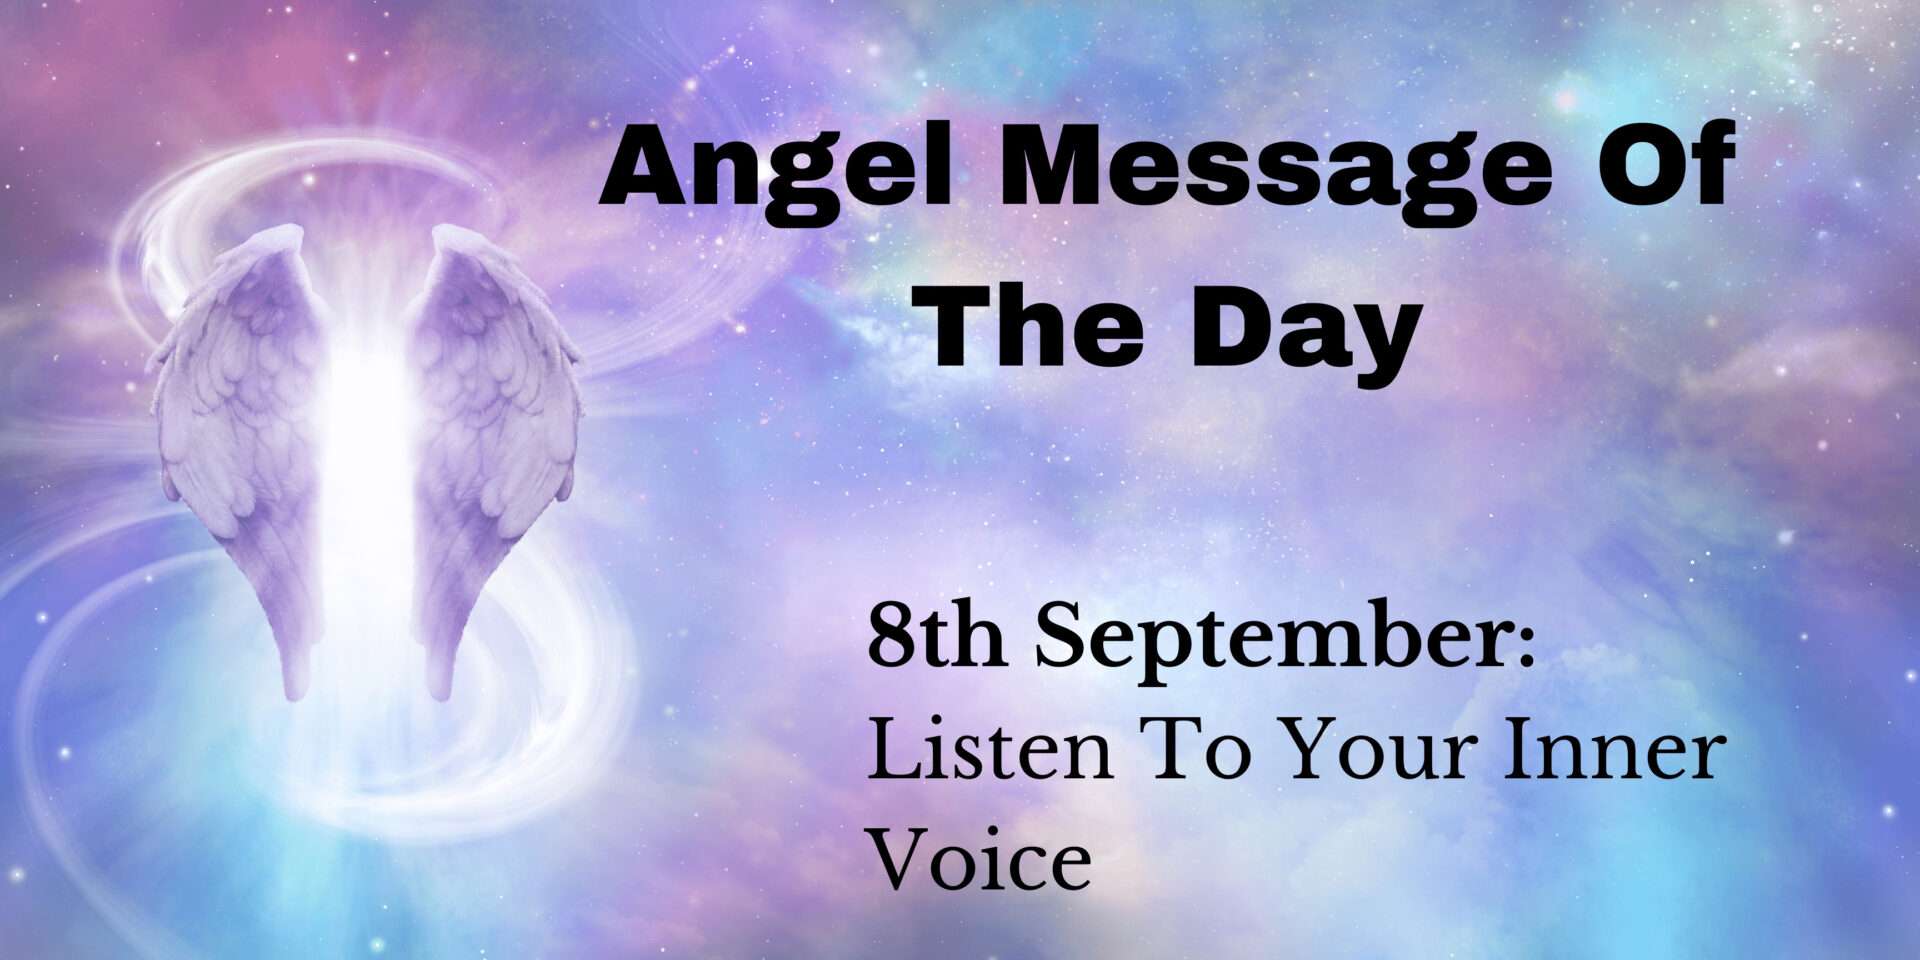 angel message of the day : listen to your inner voice